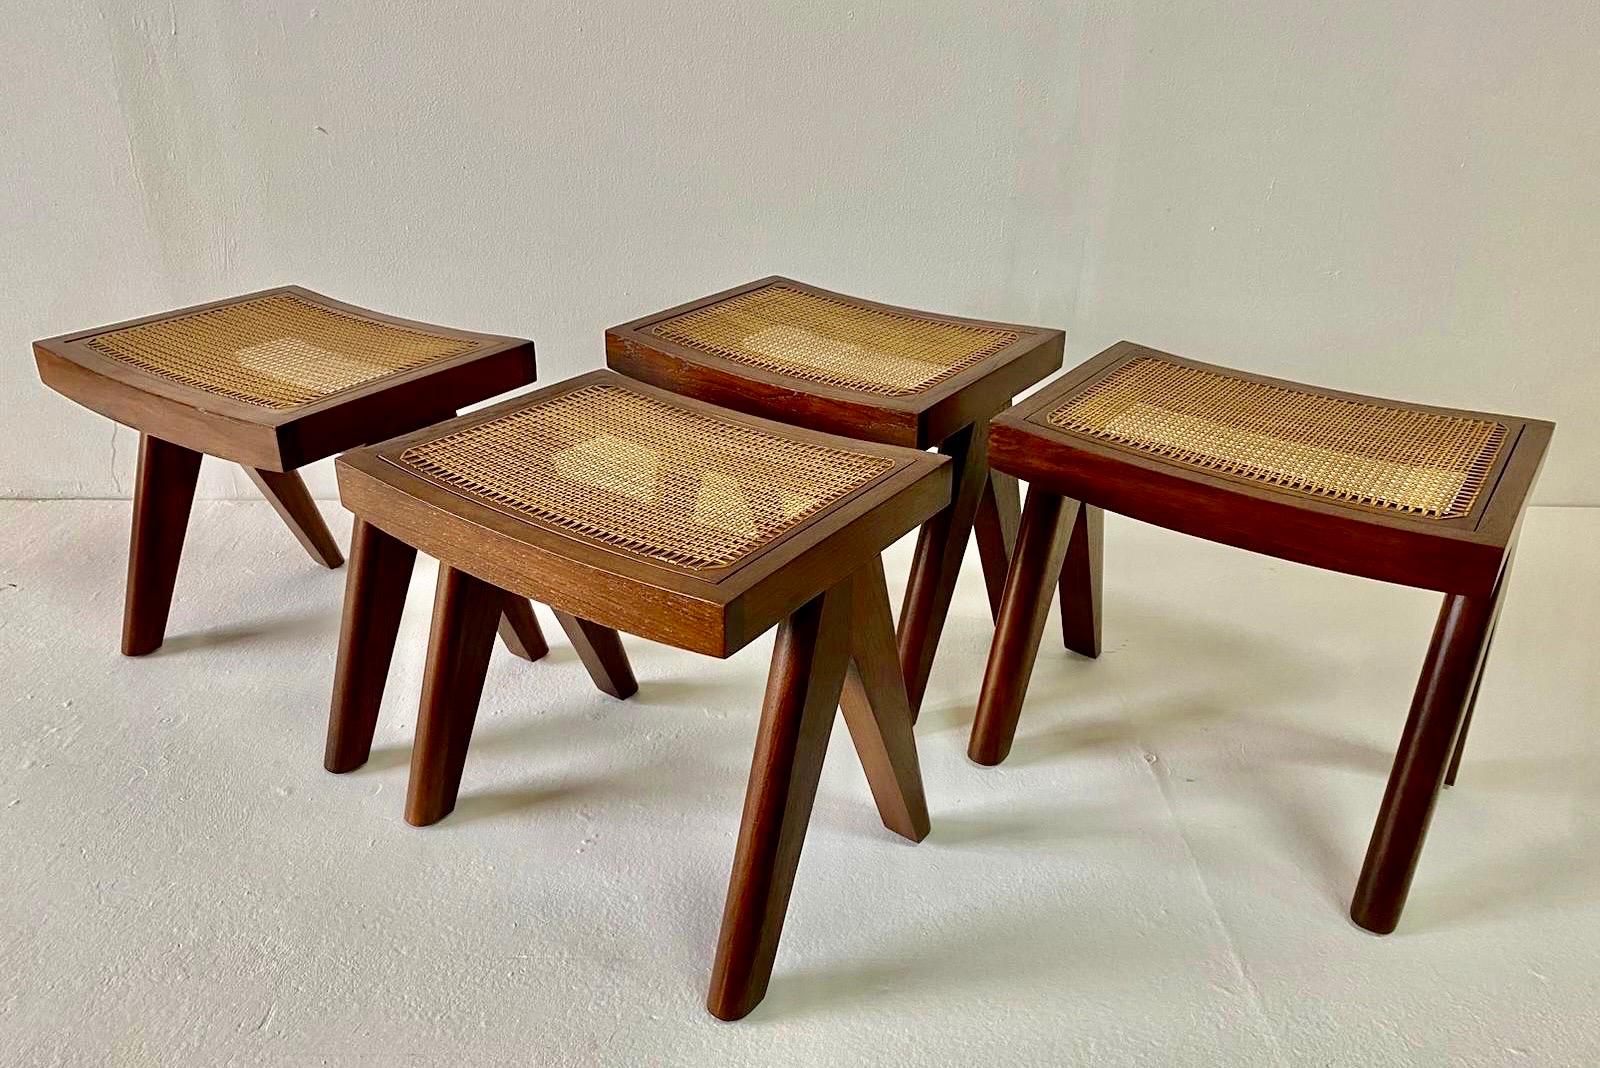 Studio Made Heavy Teak Stools - Manner of Jeanneret (2 Pairs Available) For Sale 9